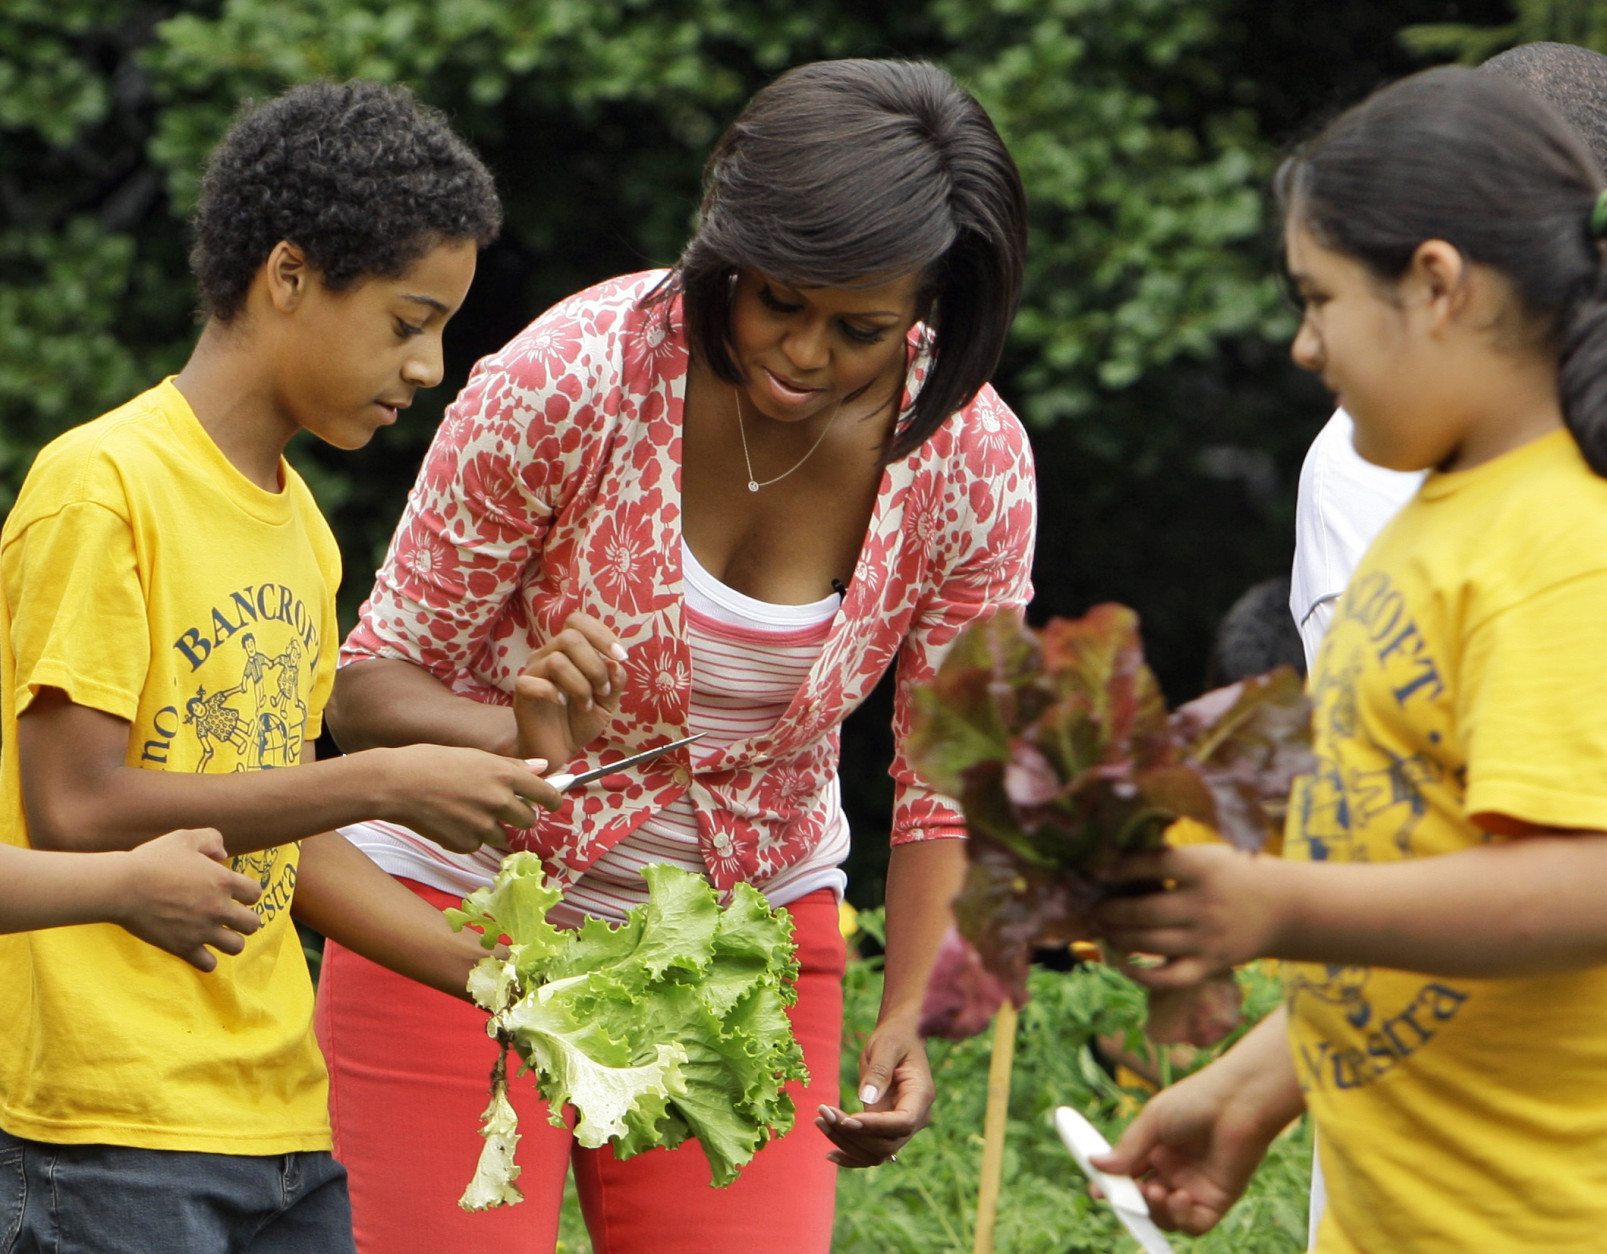 First Lady Michelle Obama works with fifth graders from Bancroft Elementary School as they harvest some of the vegetables that they planted in the garden on the South Lawn of The White House in Washington, Tuesday, June 16, 2009.(AP Photo/Alex Brandon)